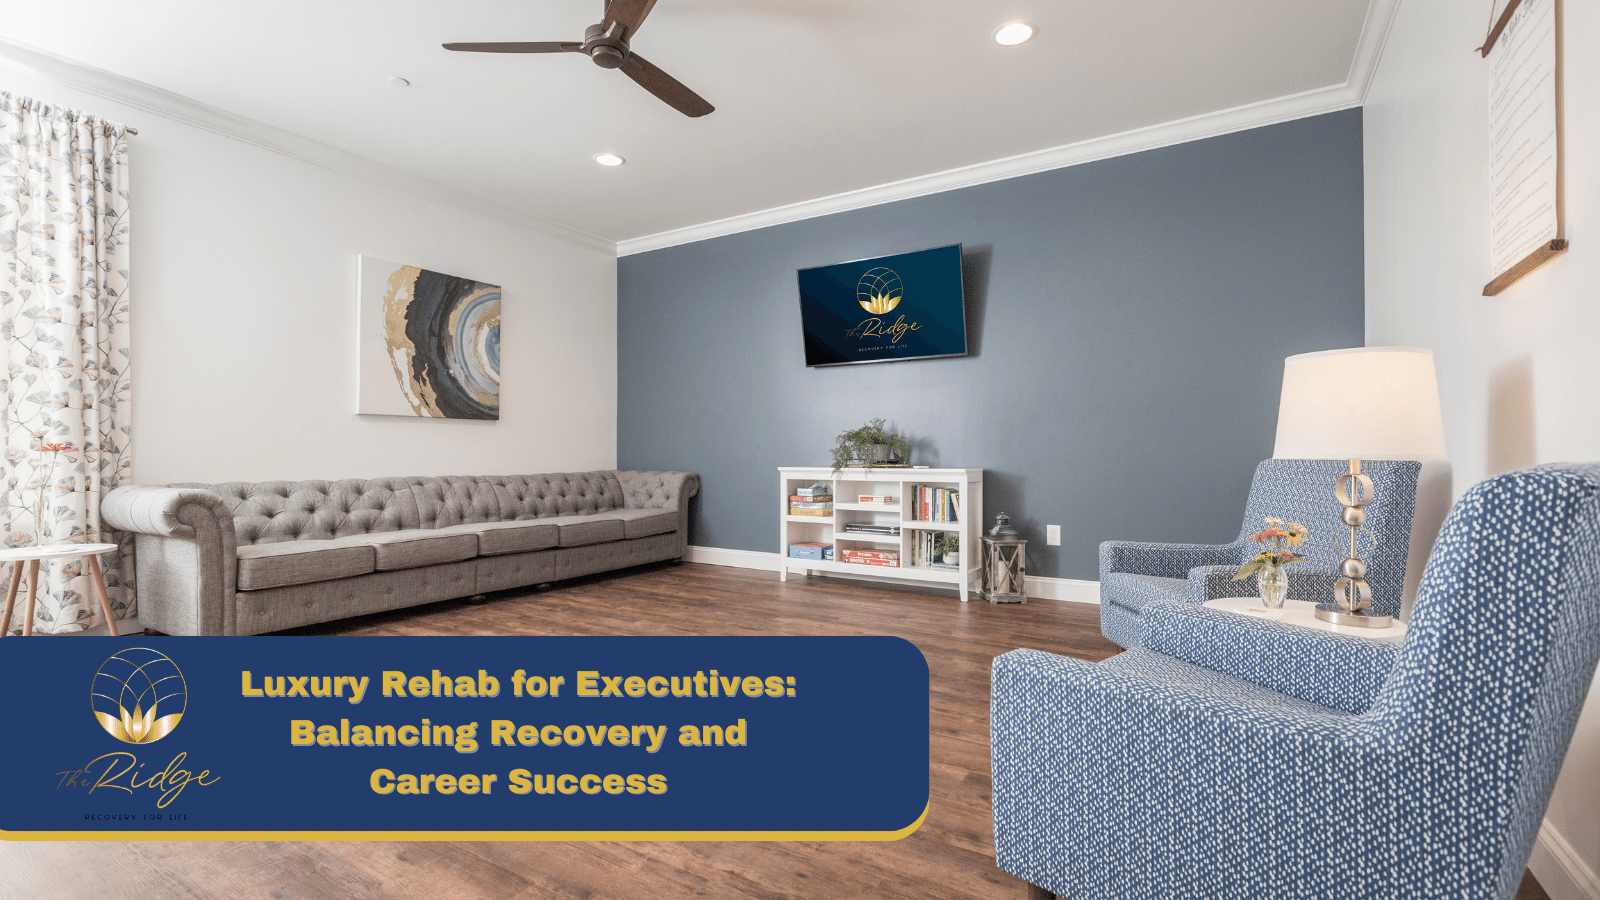 Luxury Rehab for Executives: Balancing Recovery and Career Success